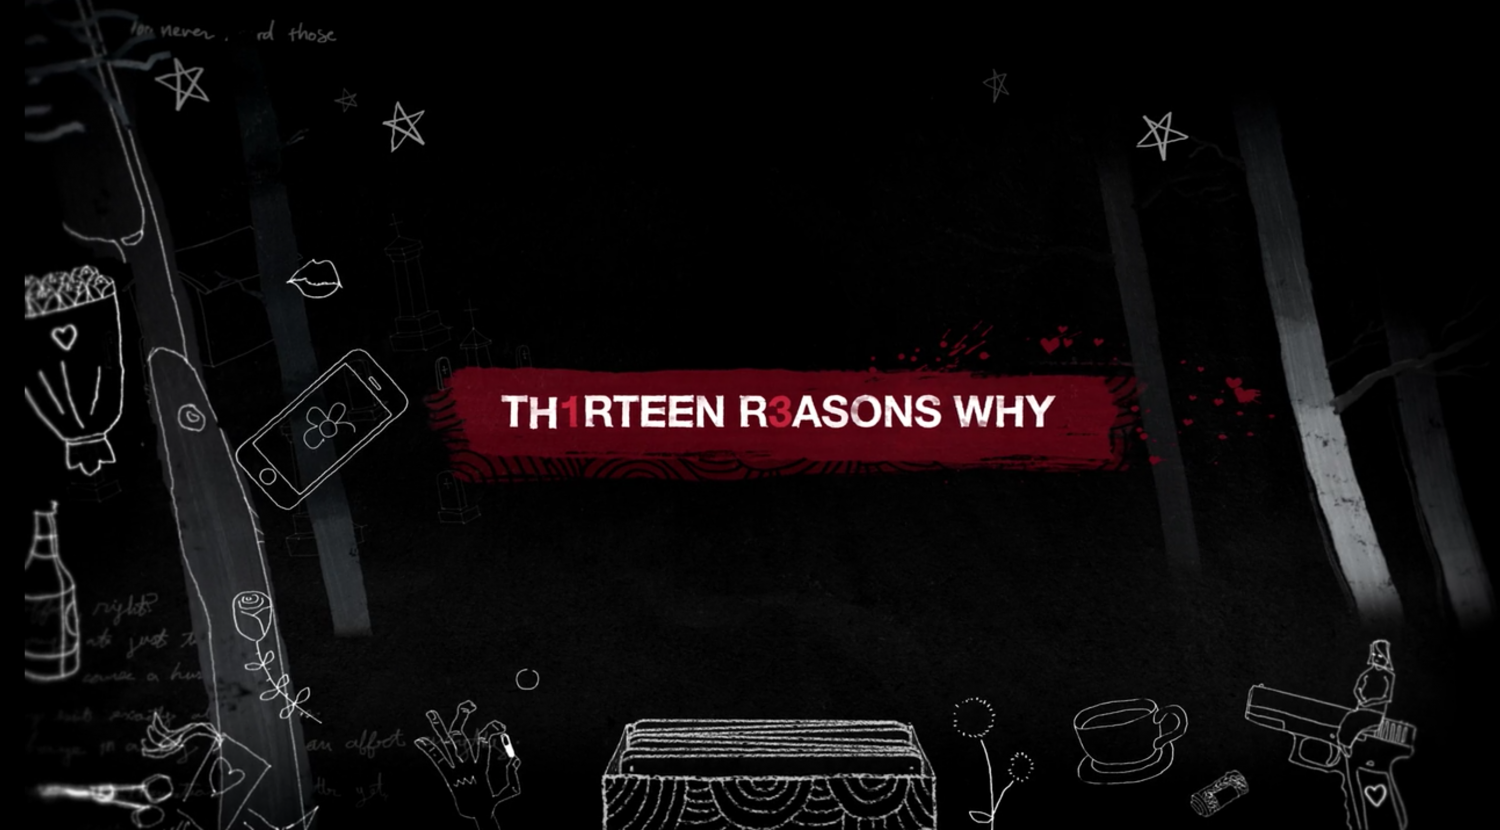 The title screen for the Netflix drama 13 Reasons Why shows symbols of the show and of suicide.